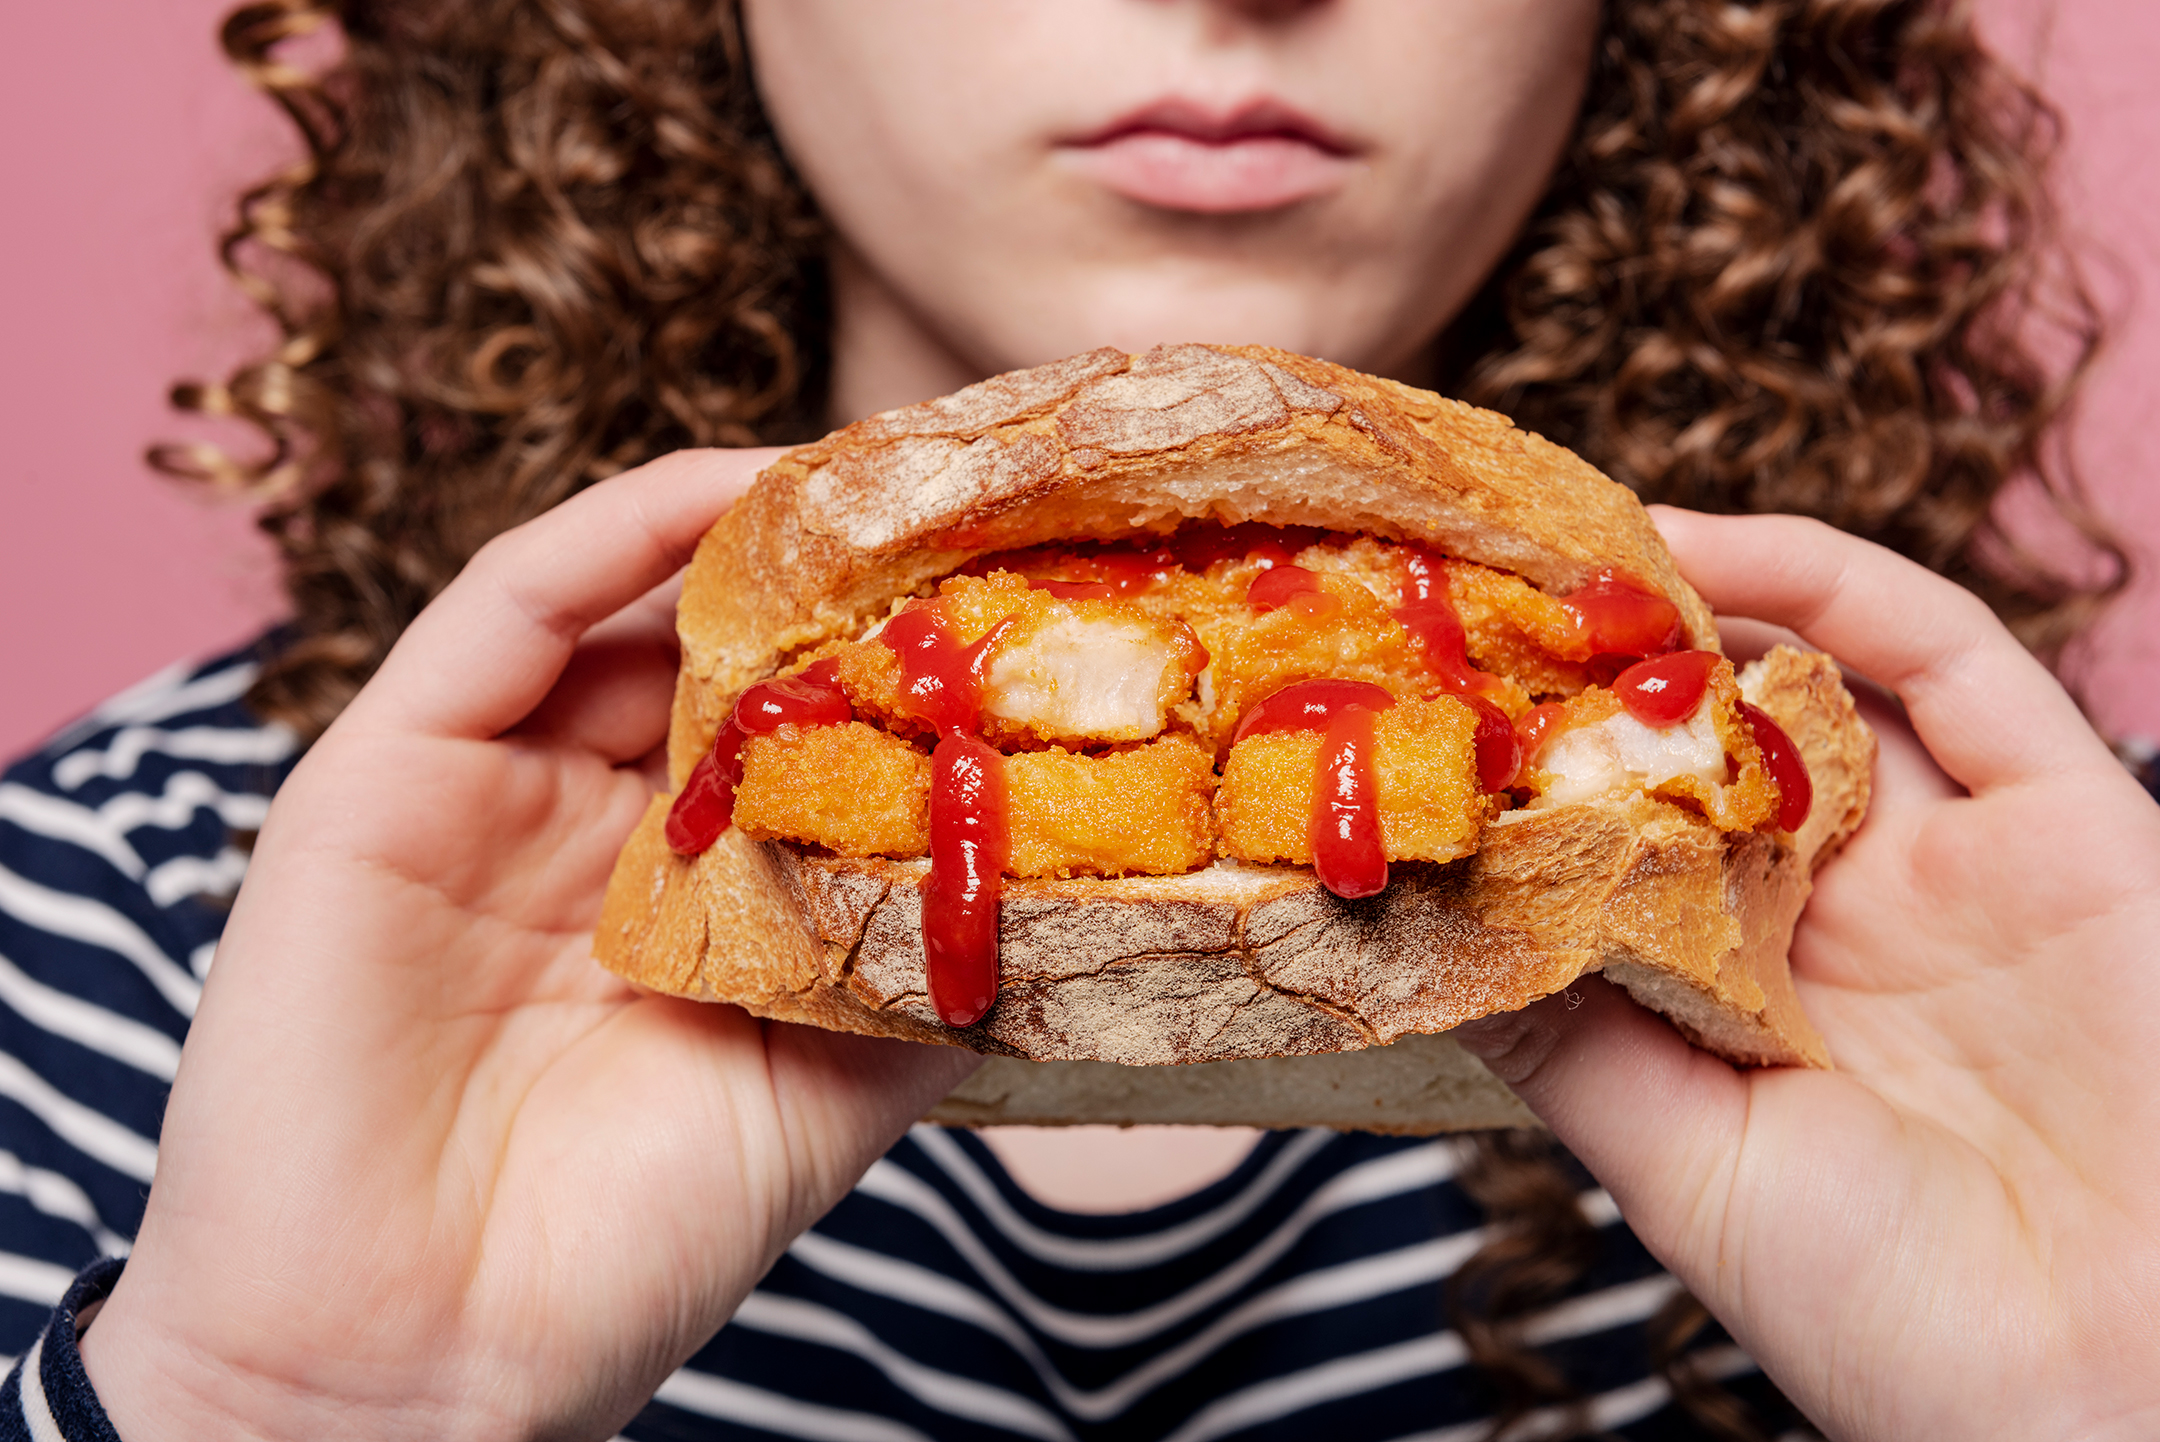 Young woman holding a Fish Finger Sandwich of deep fried fish sticks between two slices of white bread oozing with tomato ketchup